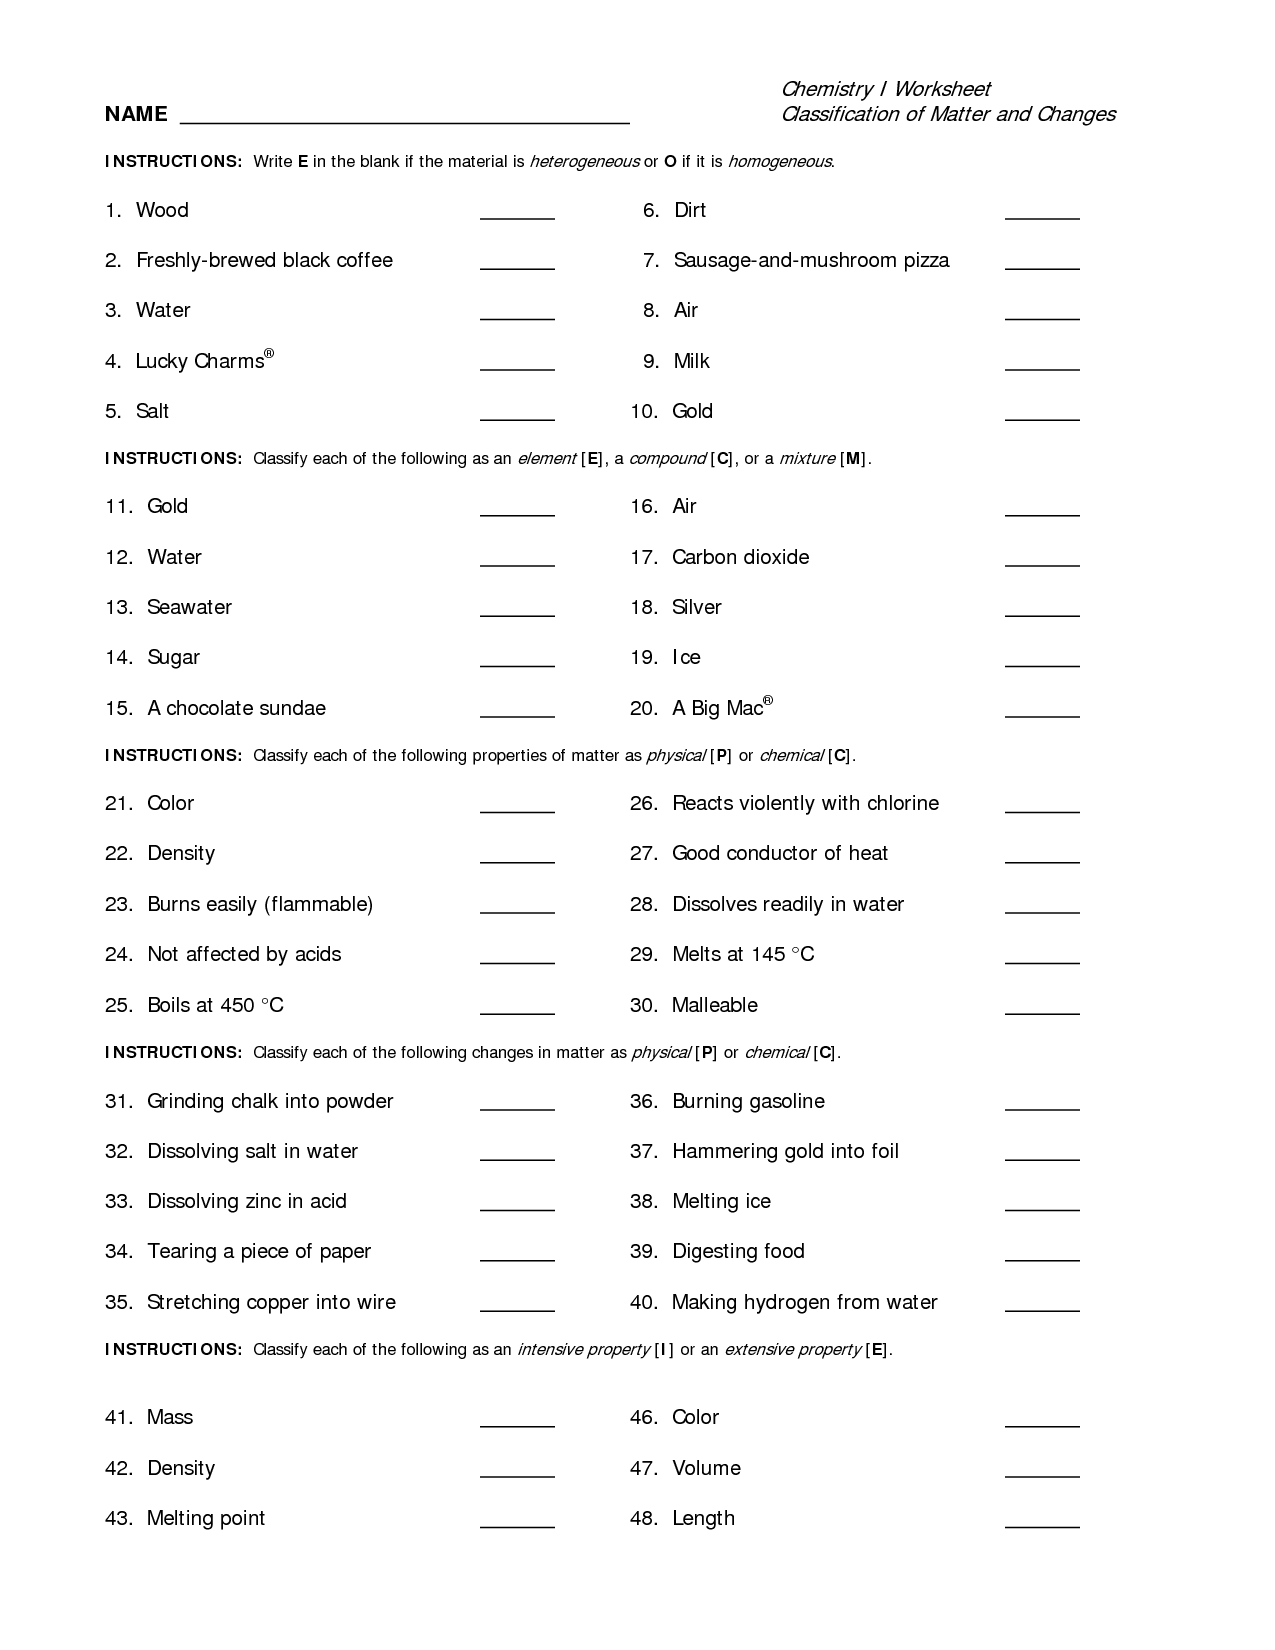 The nature of classification of matter worksheet with answers in education....